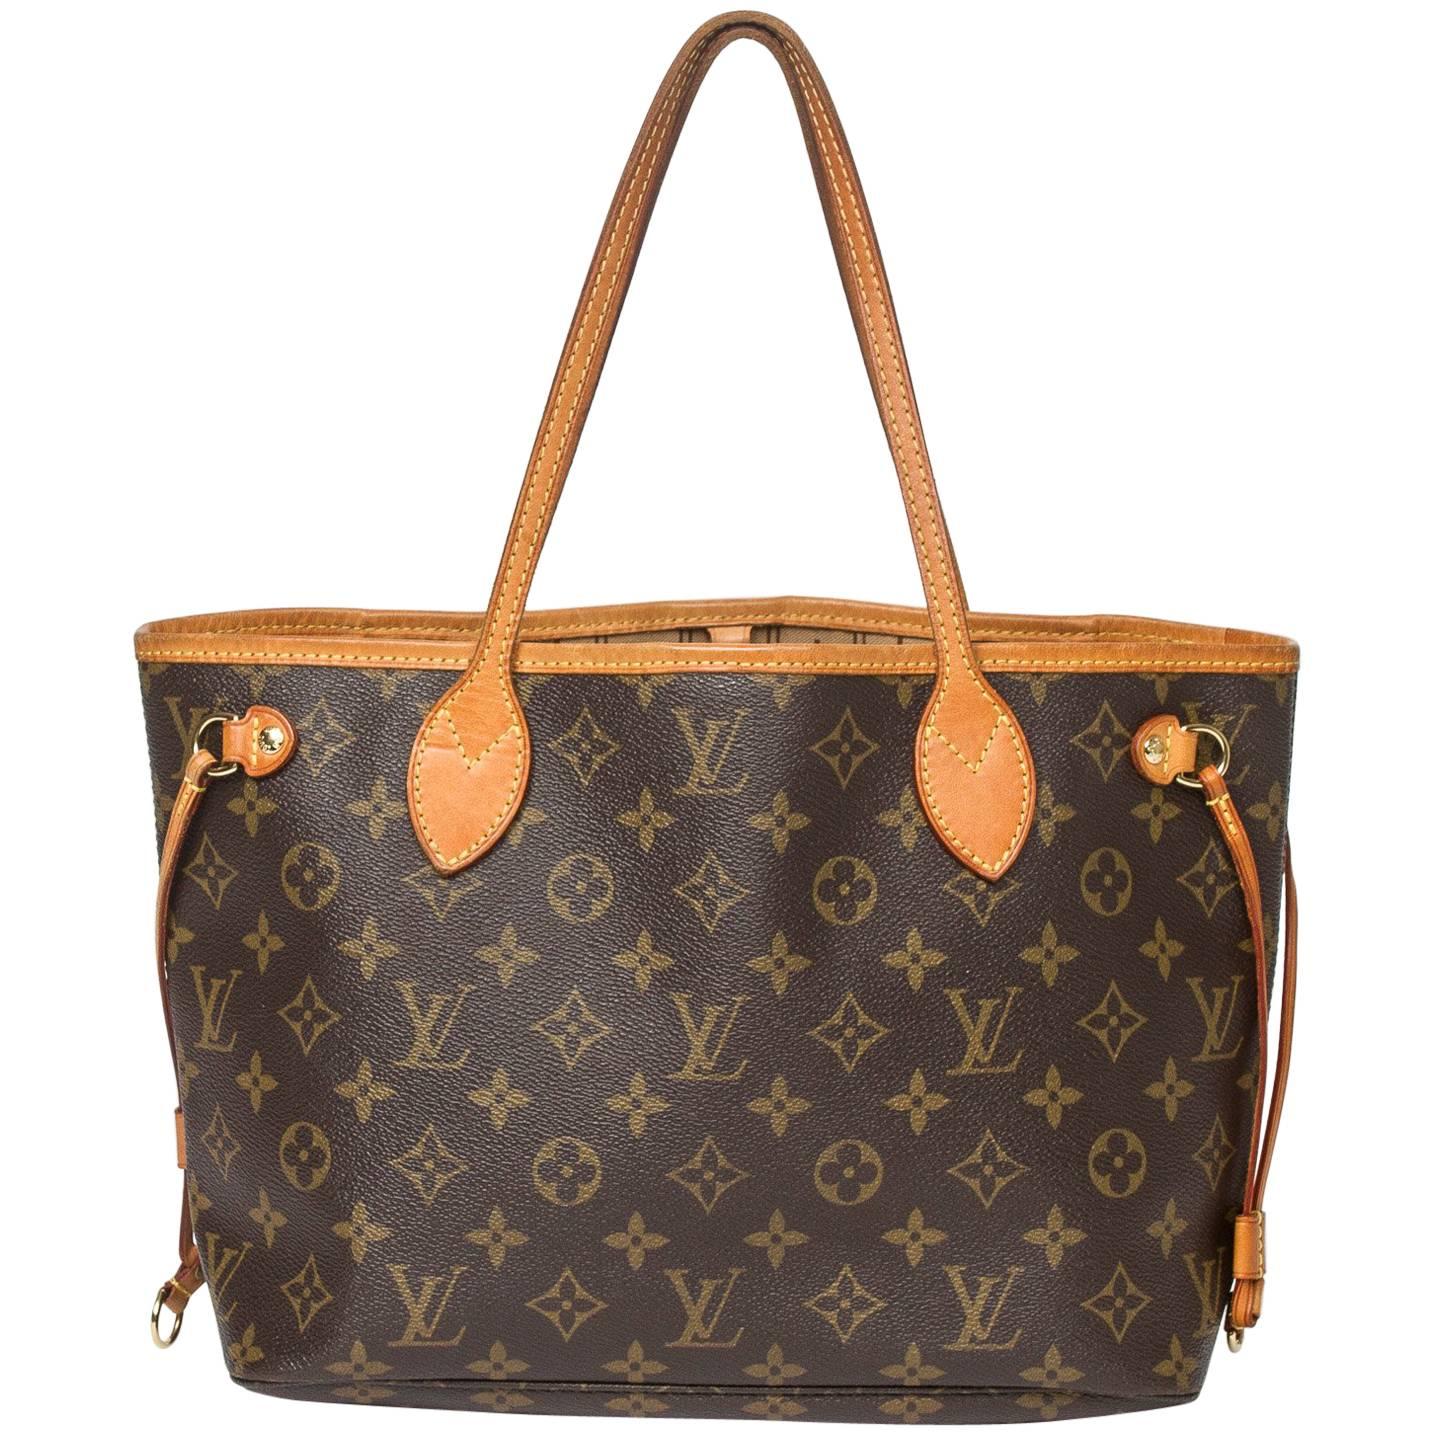 Louis Vuitton Neverfull PM in brown monogram canvas